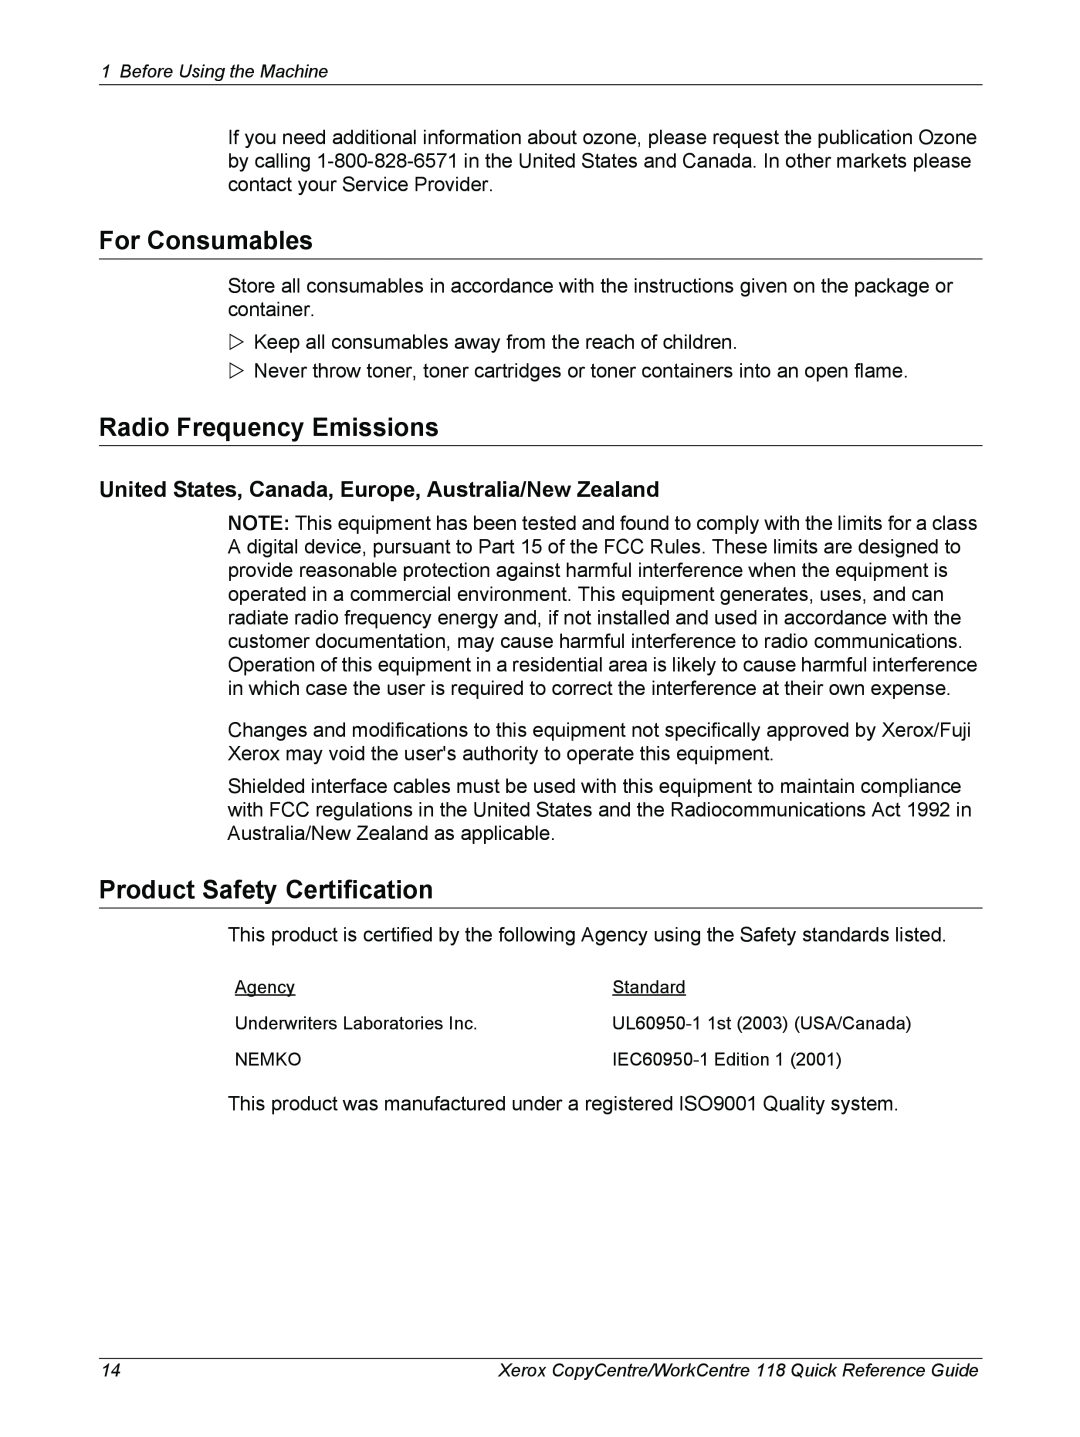 Xerox M118i, C118 manual For Consumables, Radio Frequency Emissions, Product Safety Certification 